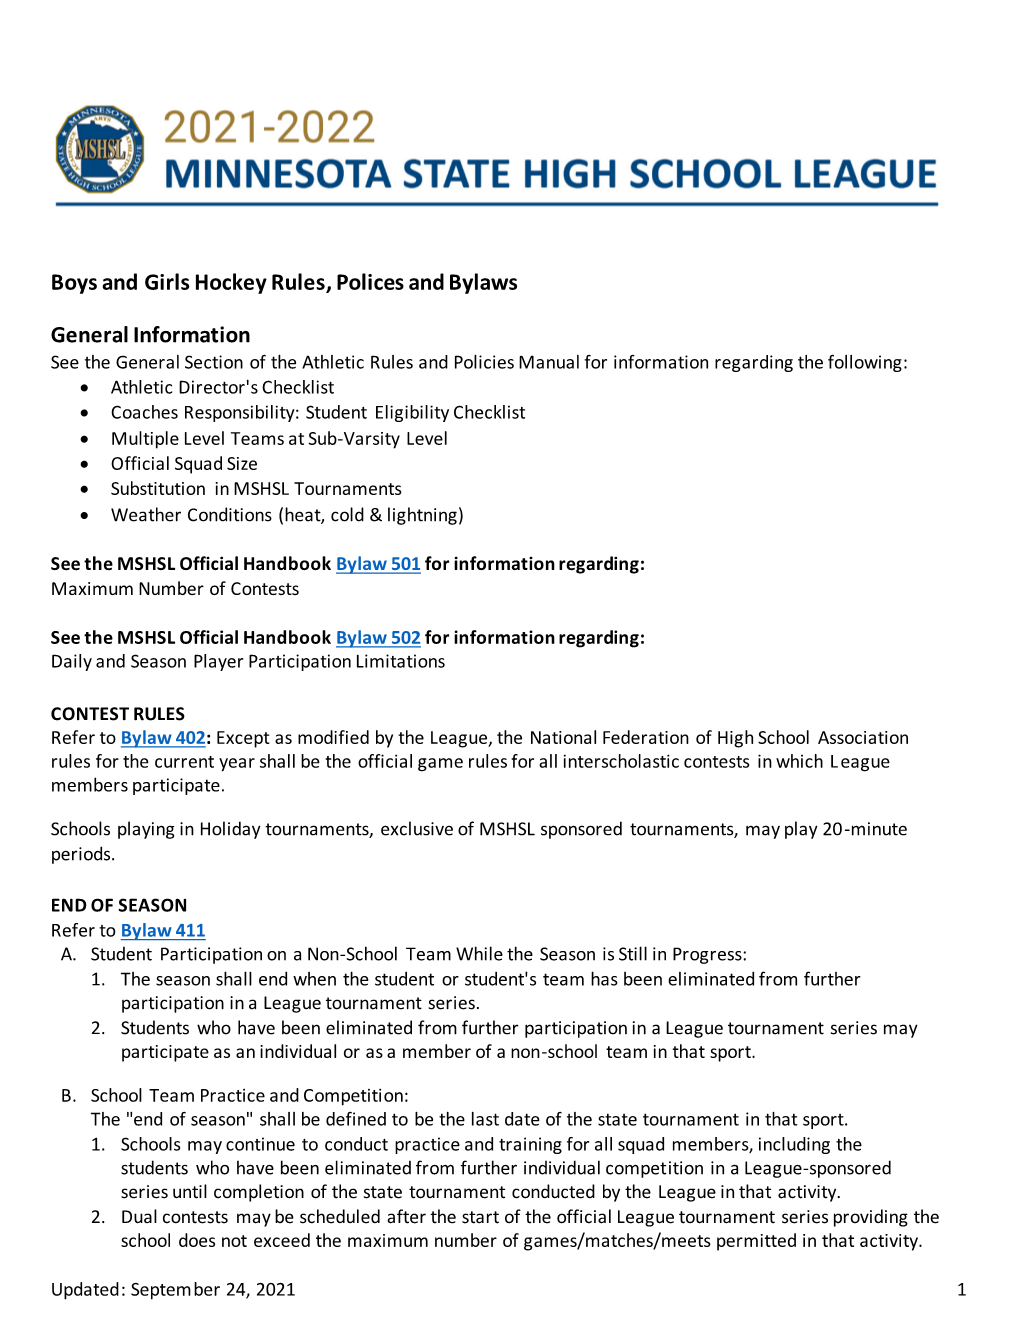 Boys and Girls Hockey Rules, Polices and Bylaws General Information